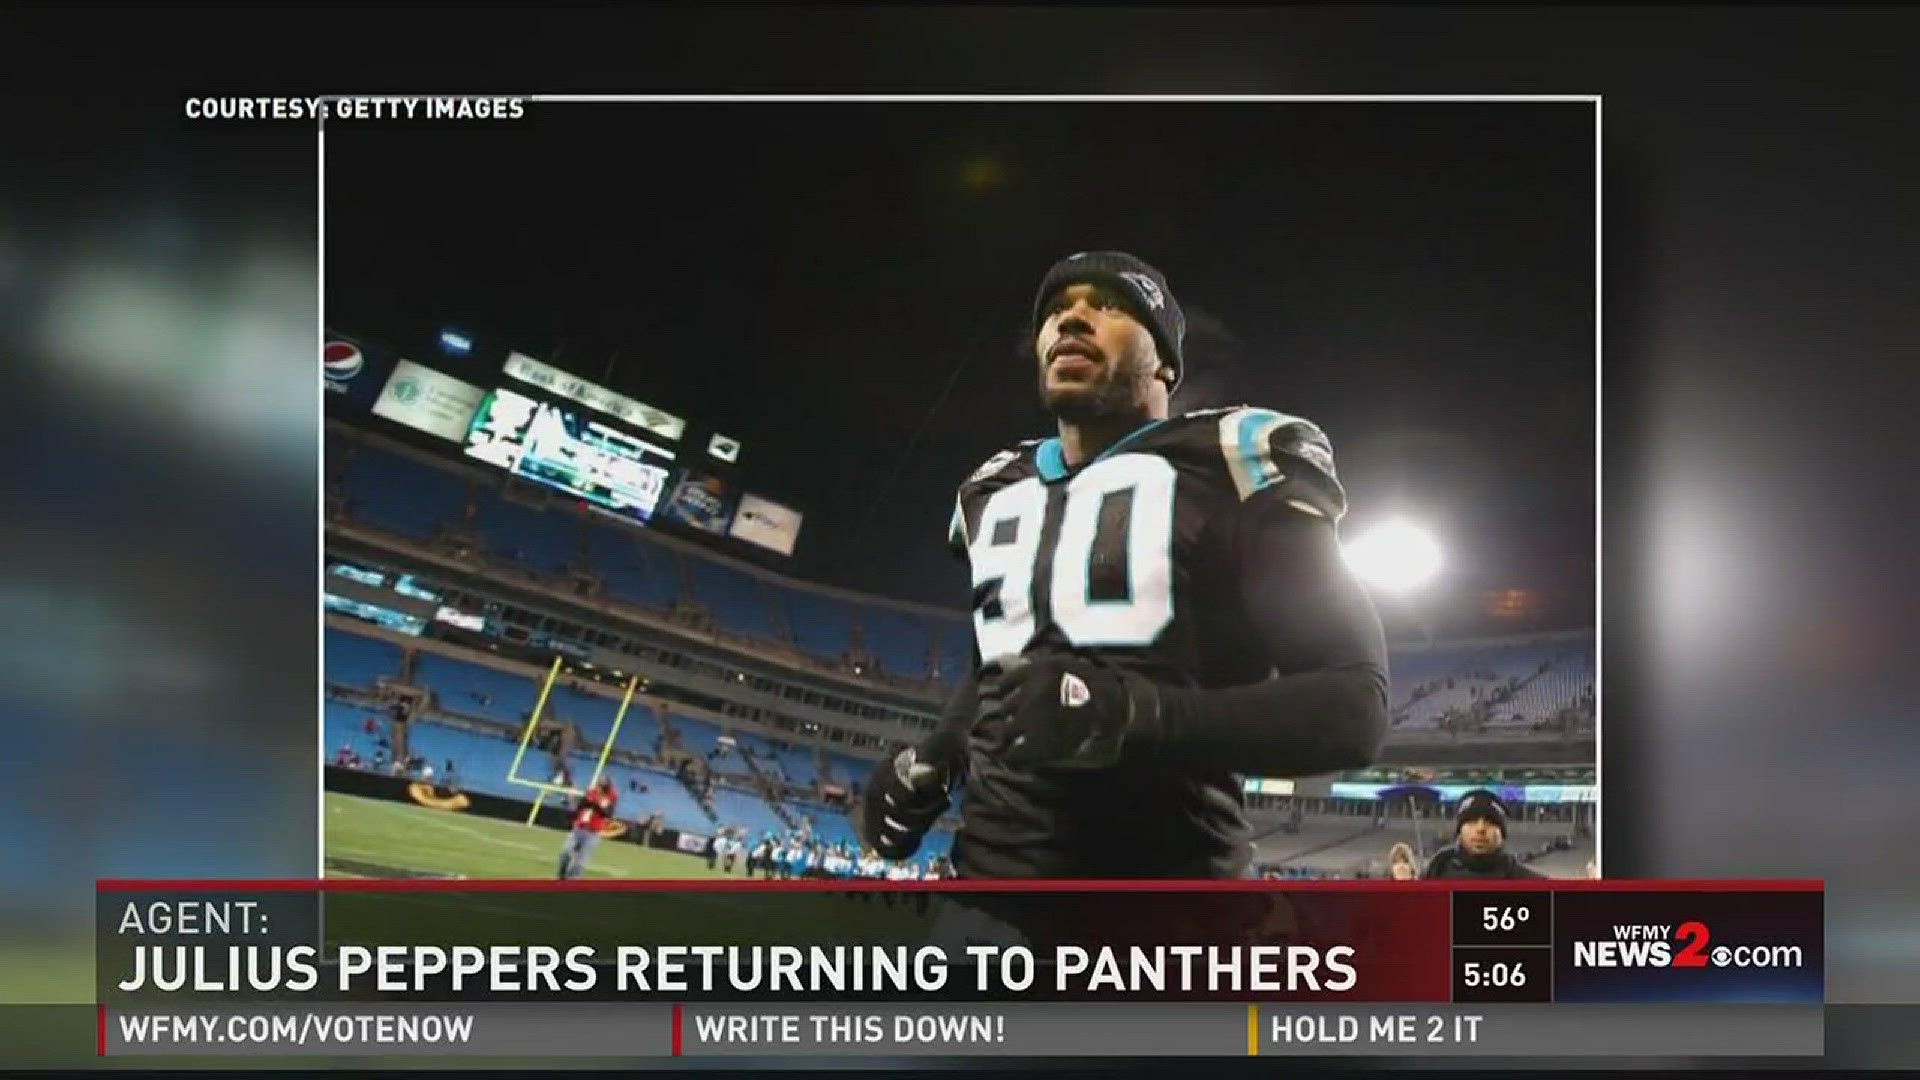 Julius Peppers Returning to Panthers: Agent